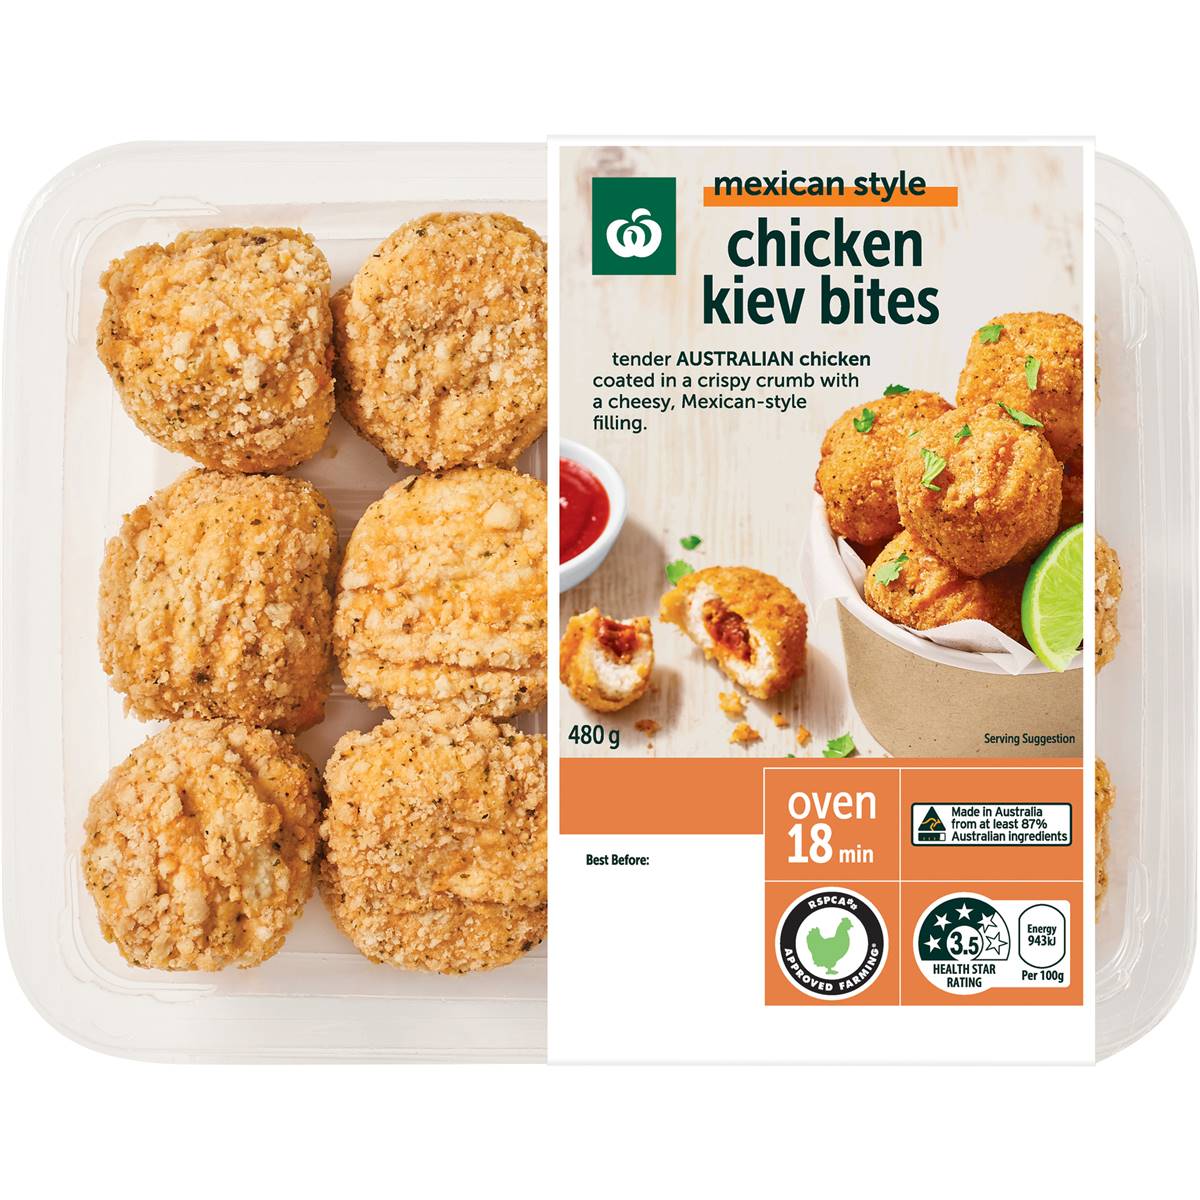 Calories in Woolworths Mexican Style Chicken Kiev Bites